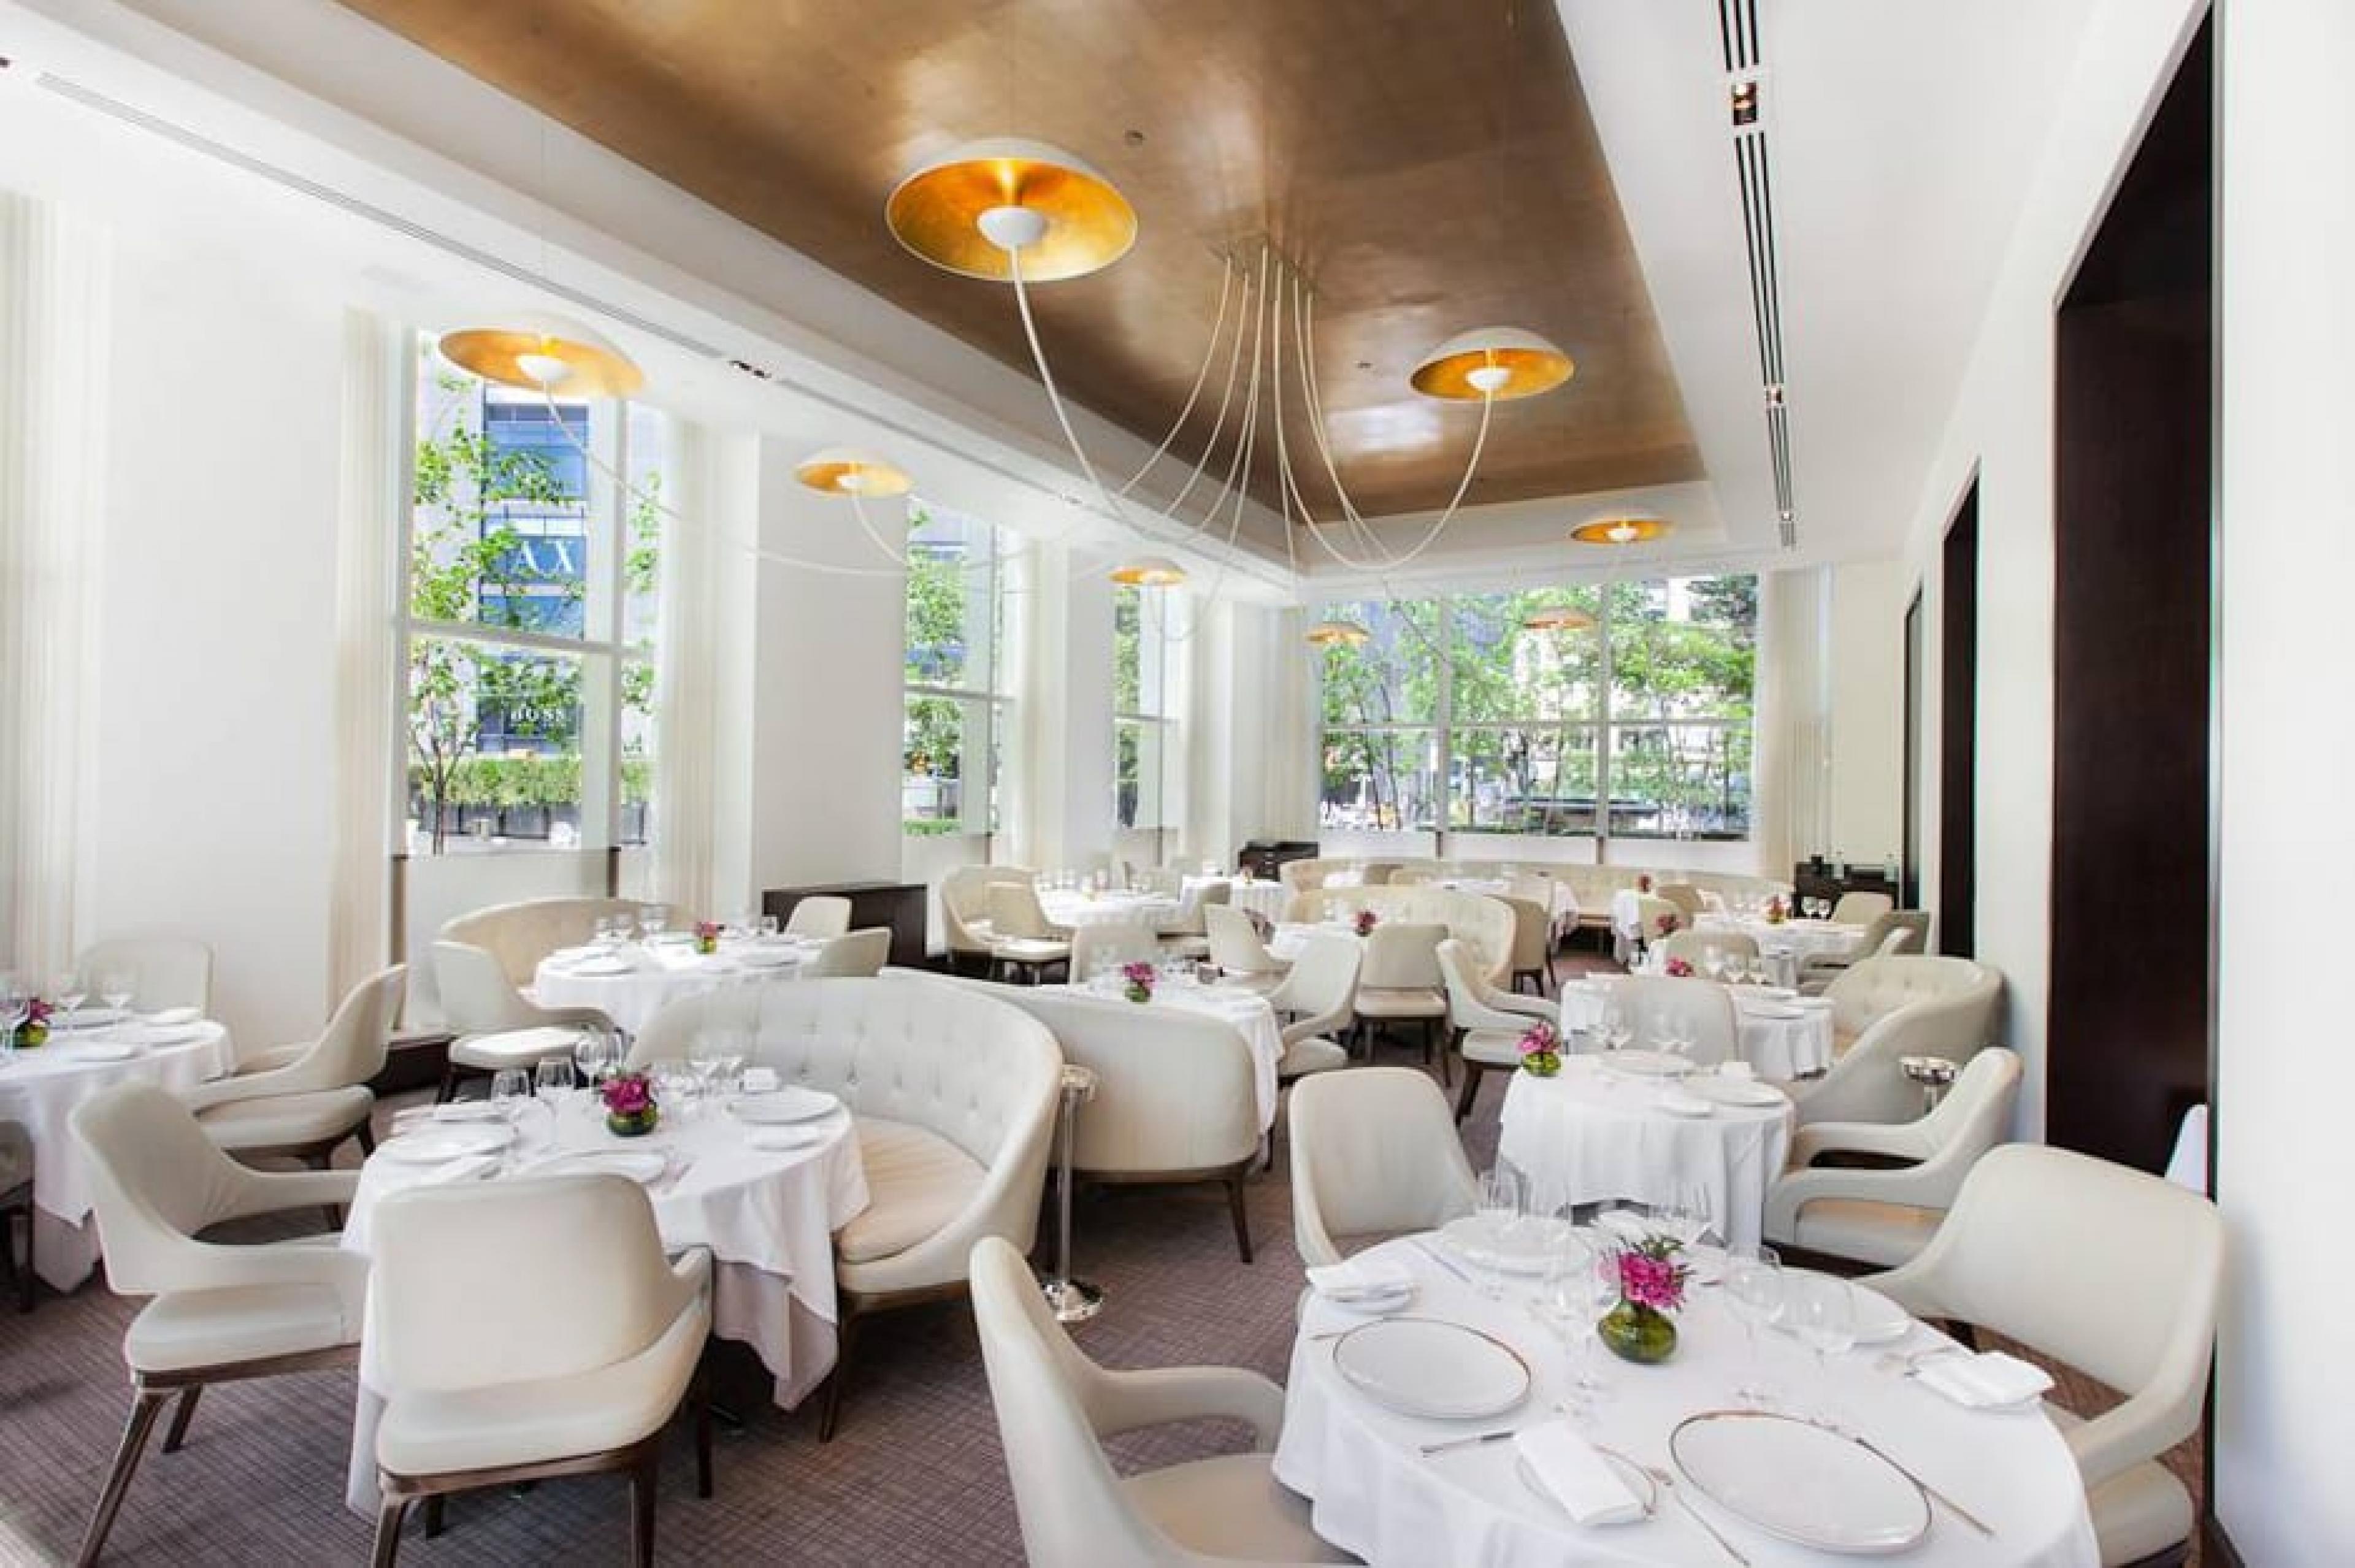 Dinning Area at Jean-Georges, New York City, New York